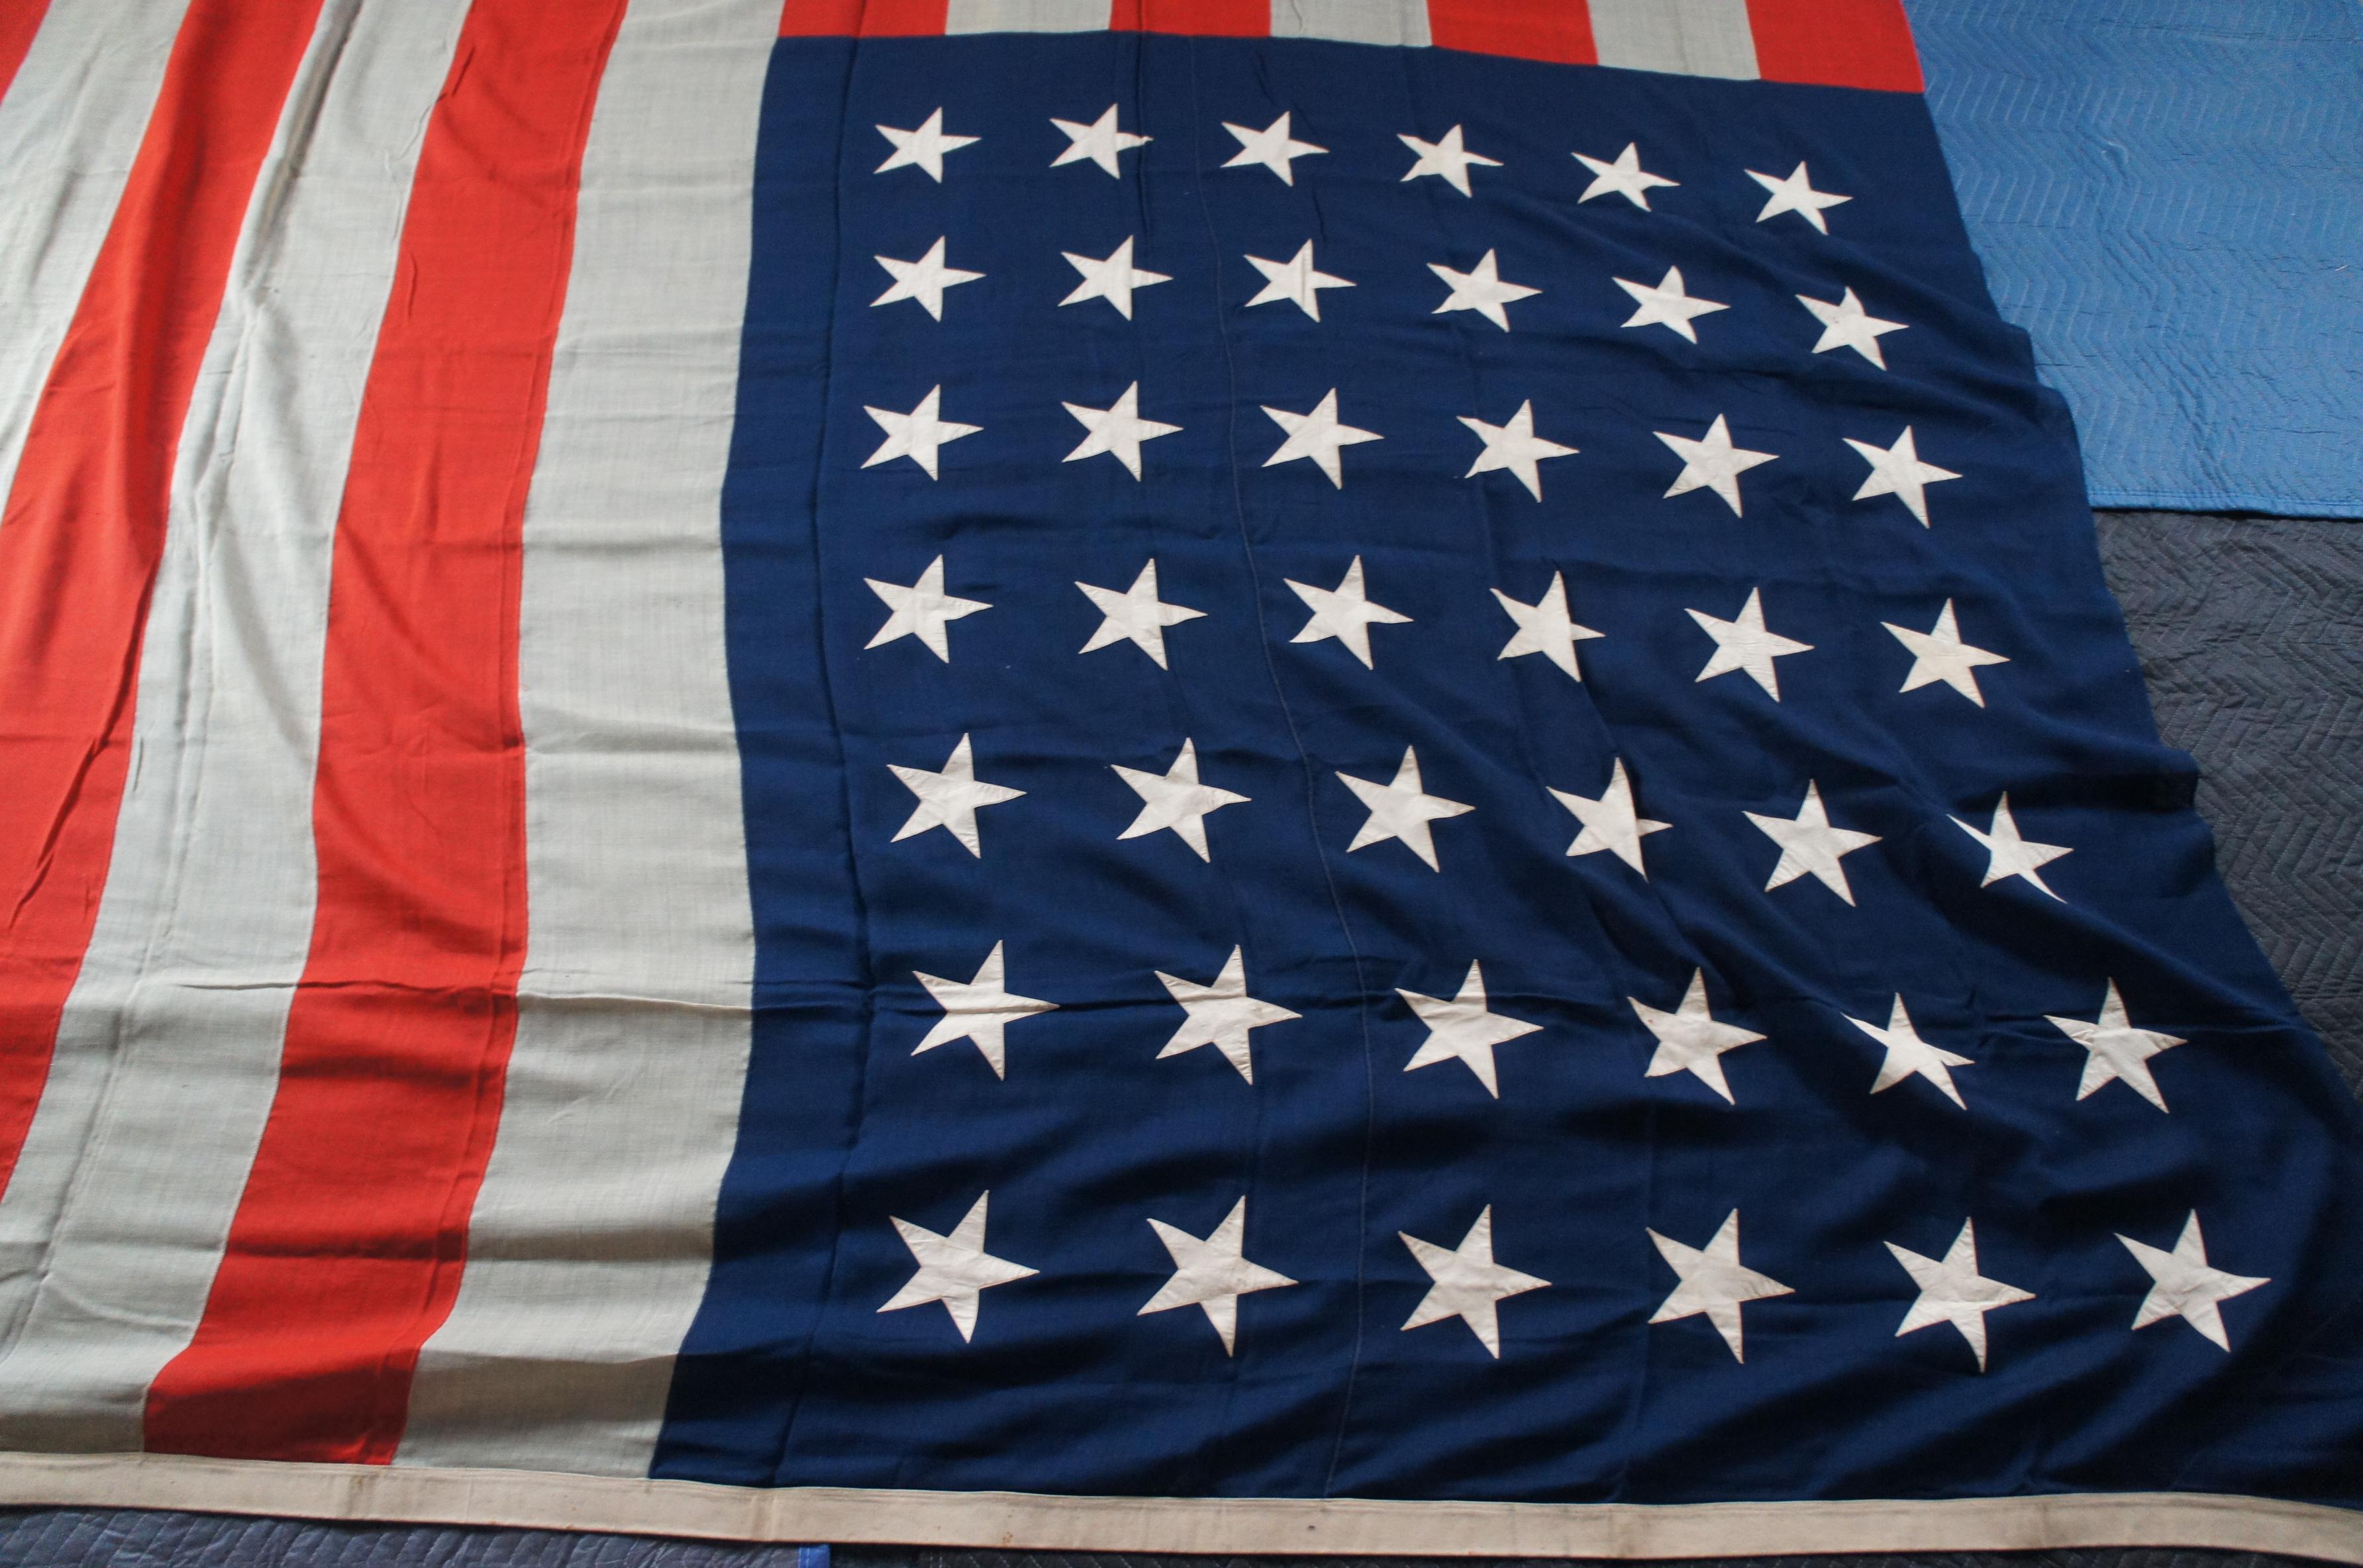 Rare Monumental 1890 Antique 42 Star United States of America Flag For Sale 1